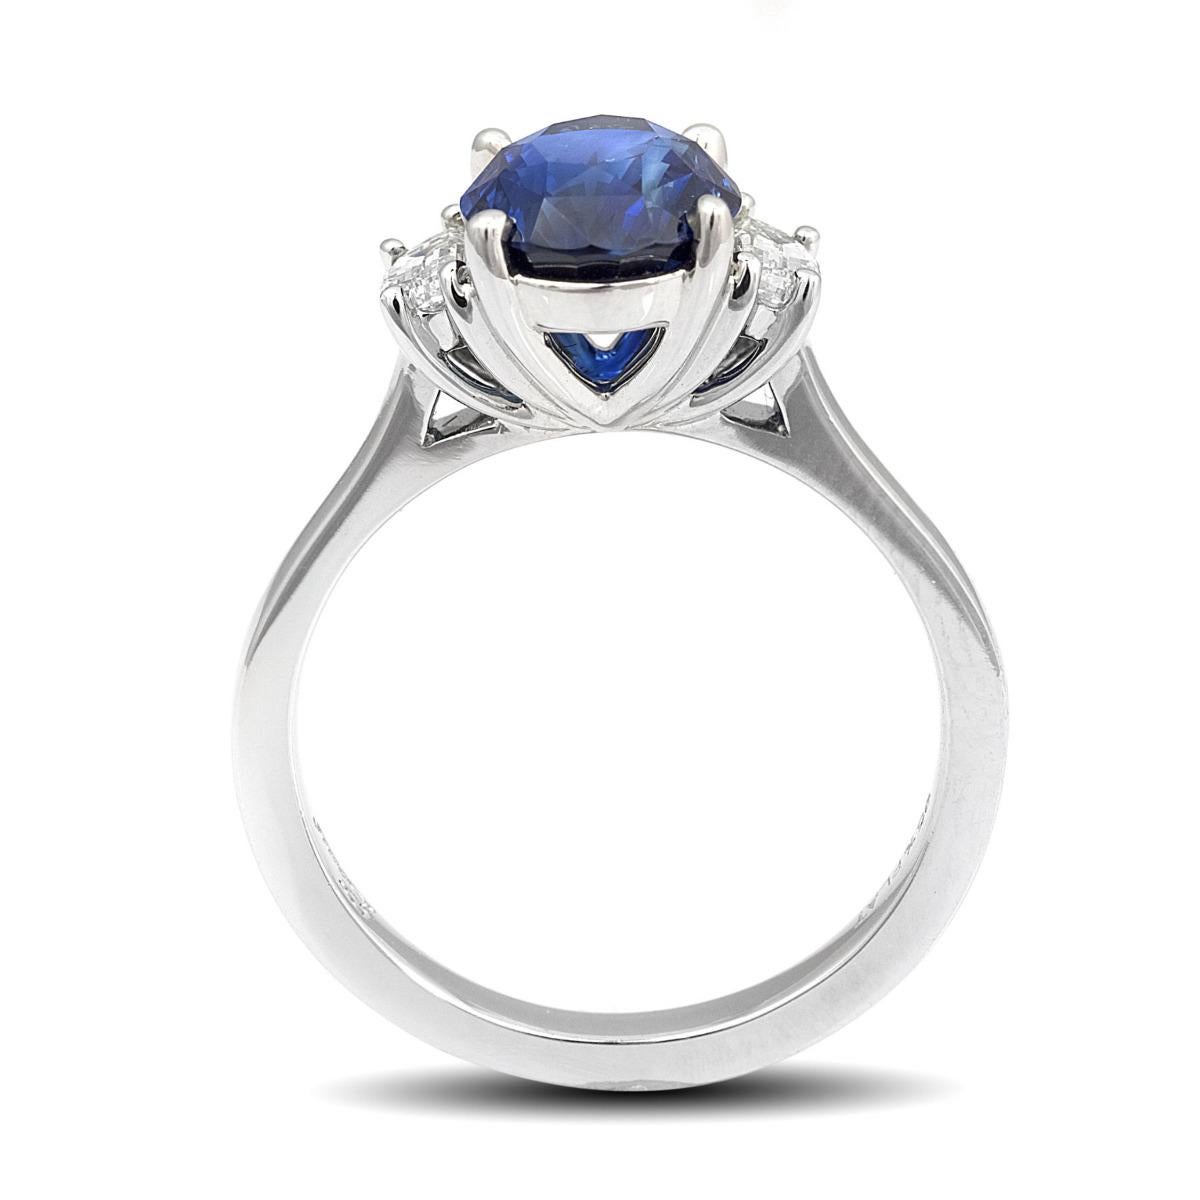 Mixed Cut GIA Certified 2.72 Carats Blue Sapphire Diamonds set in Platinum Ring 